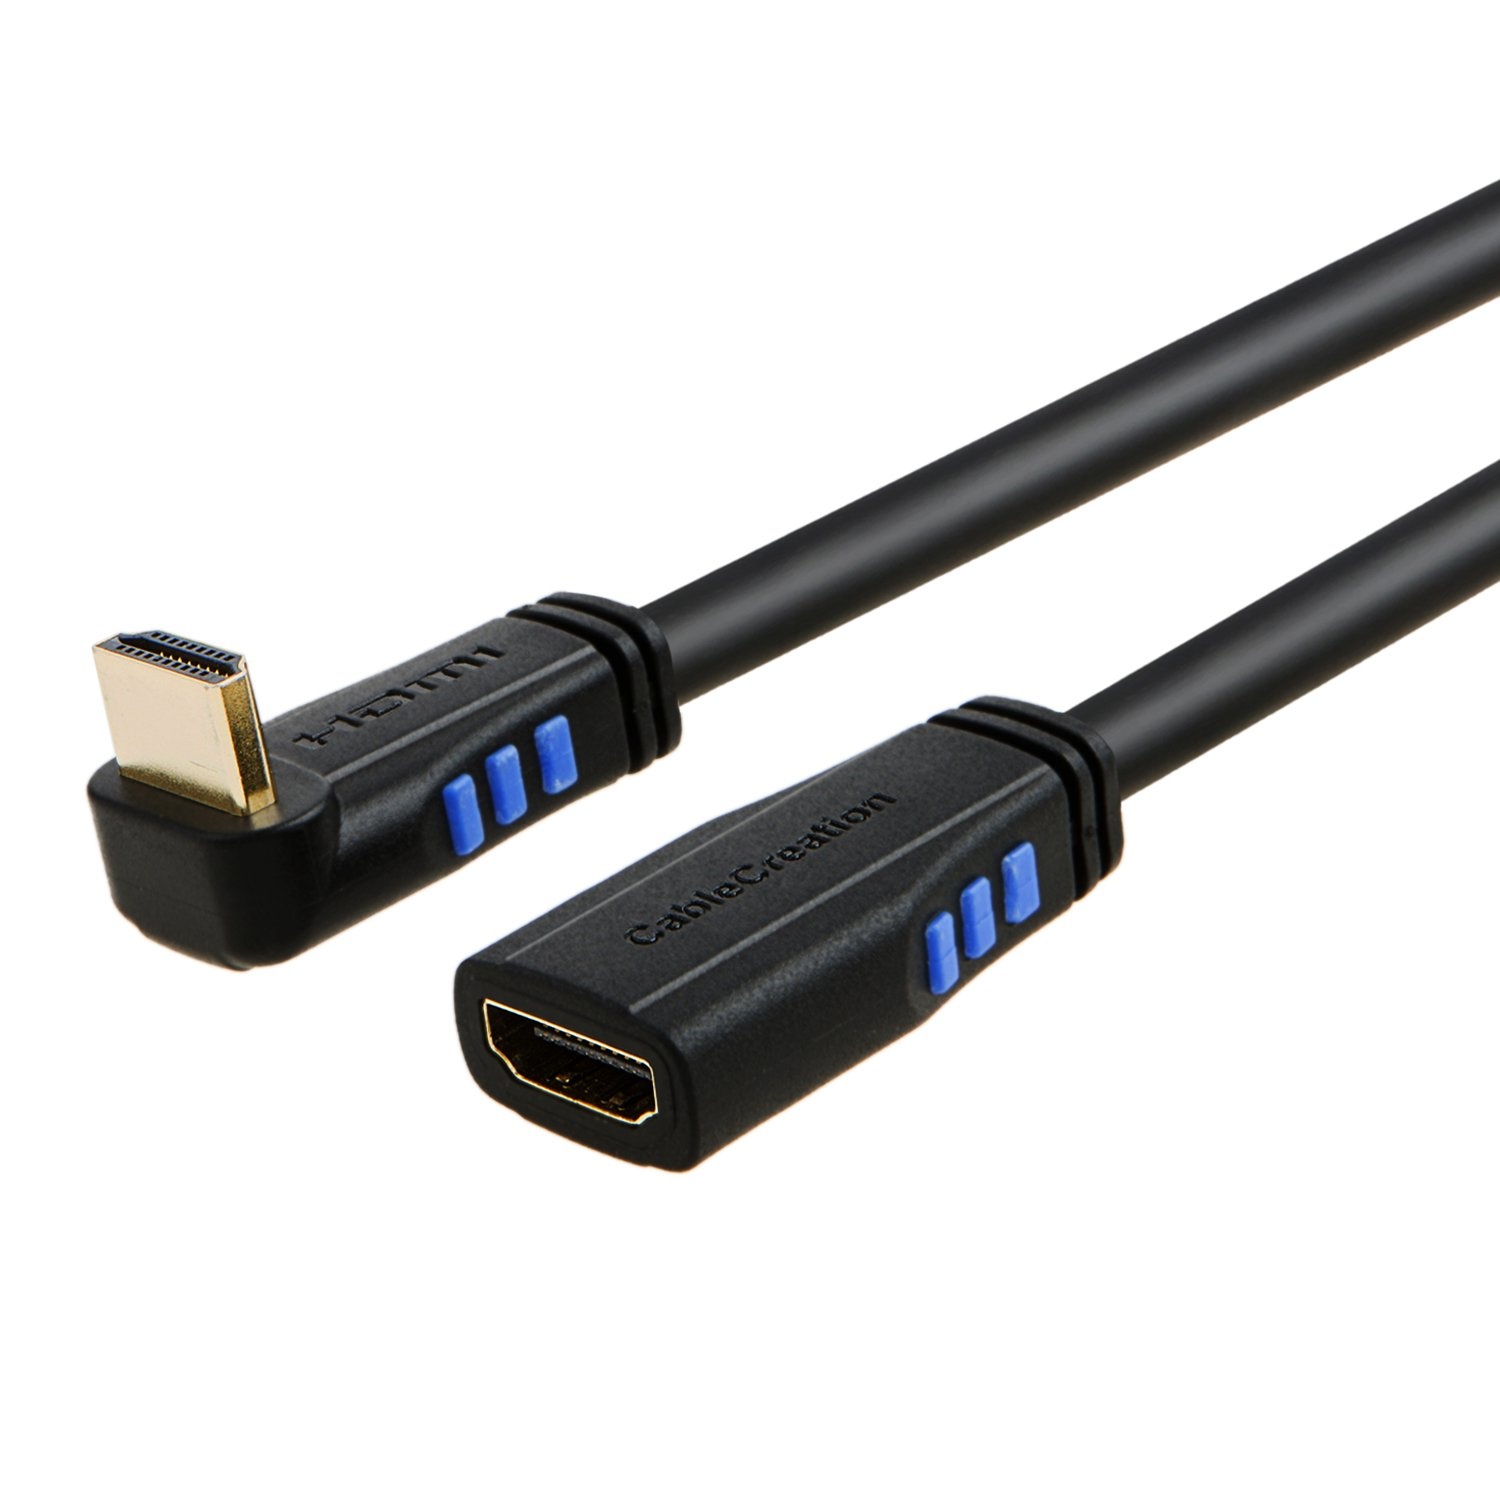 HDMI 2.0 Extension Cable 3 Feet/0.9 Meters Downward, #CC0476